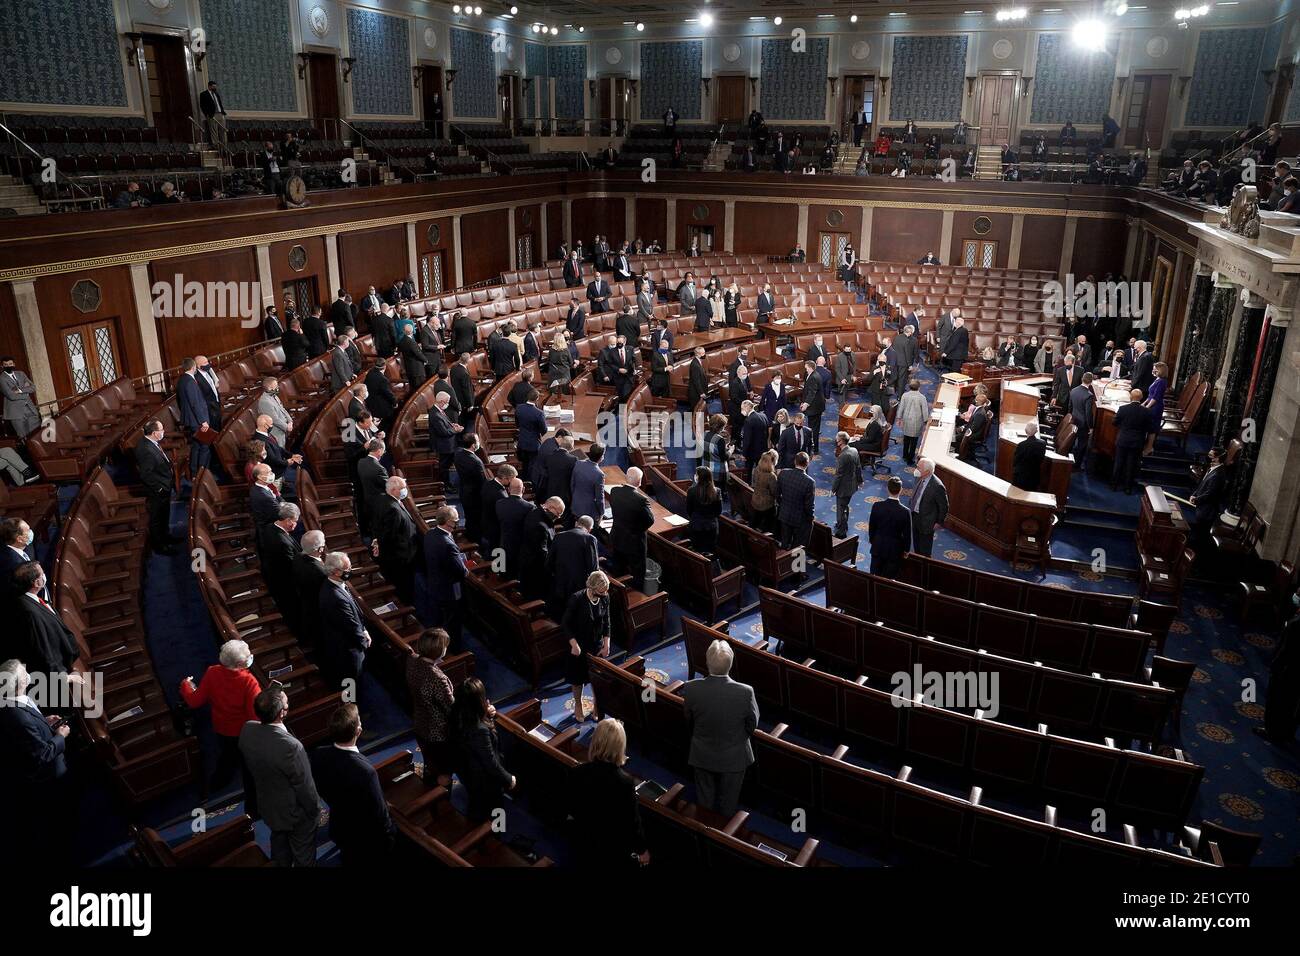 Washington, United States Of America. 06th Jan, 2021. The House Chamber is seen during a joint session of Congress to count the Electoral College votes from the 2020 presidential election on Wednesday, January 6, 2021.Credit: Greg Nash/Pool via CNP | usage worldwide Credit: dpa/Alamy Live News Stock Photo